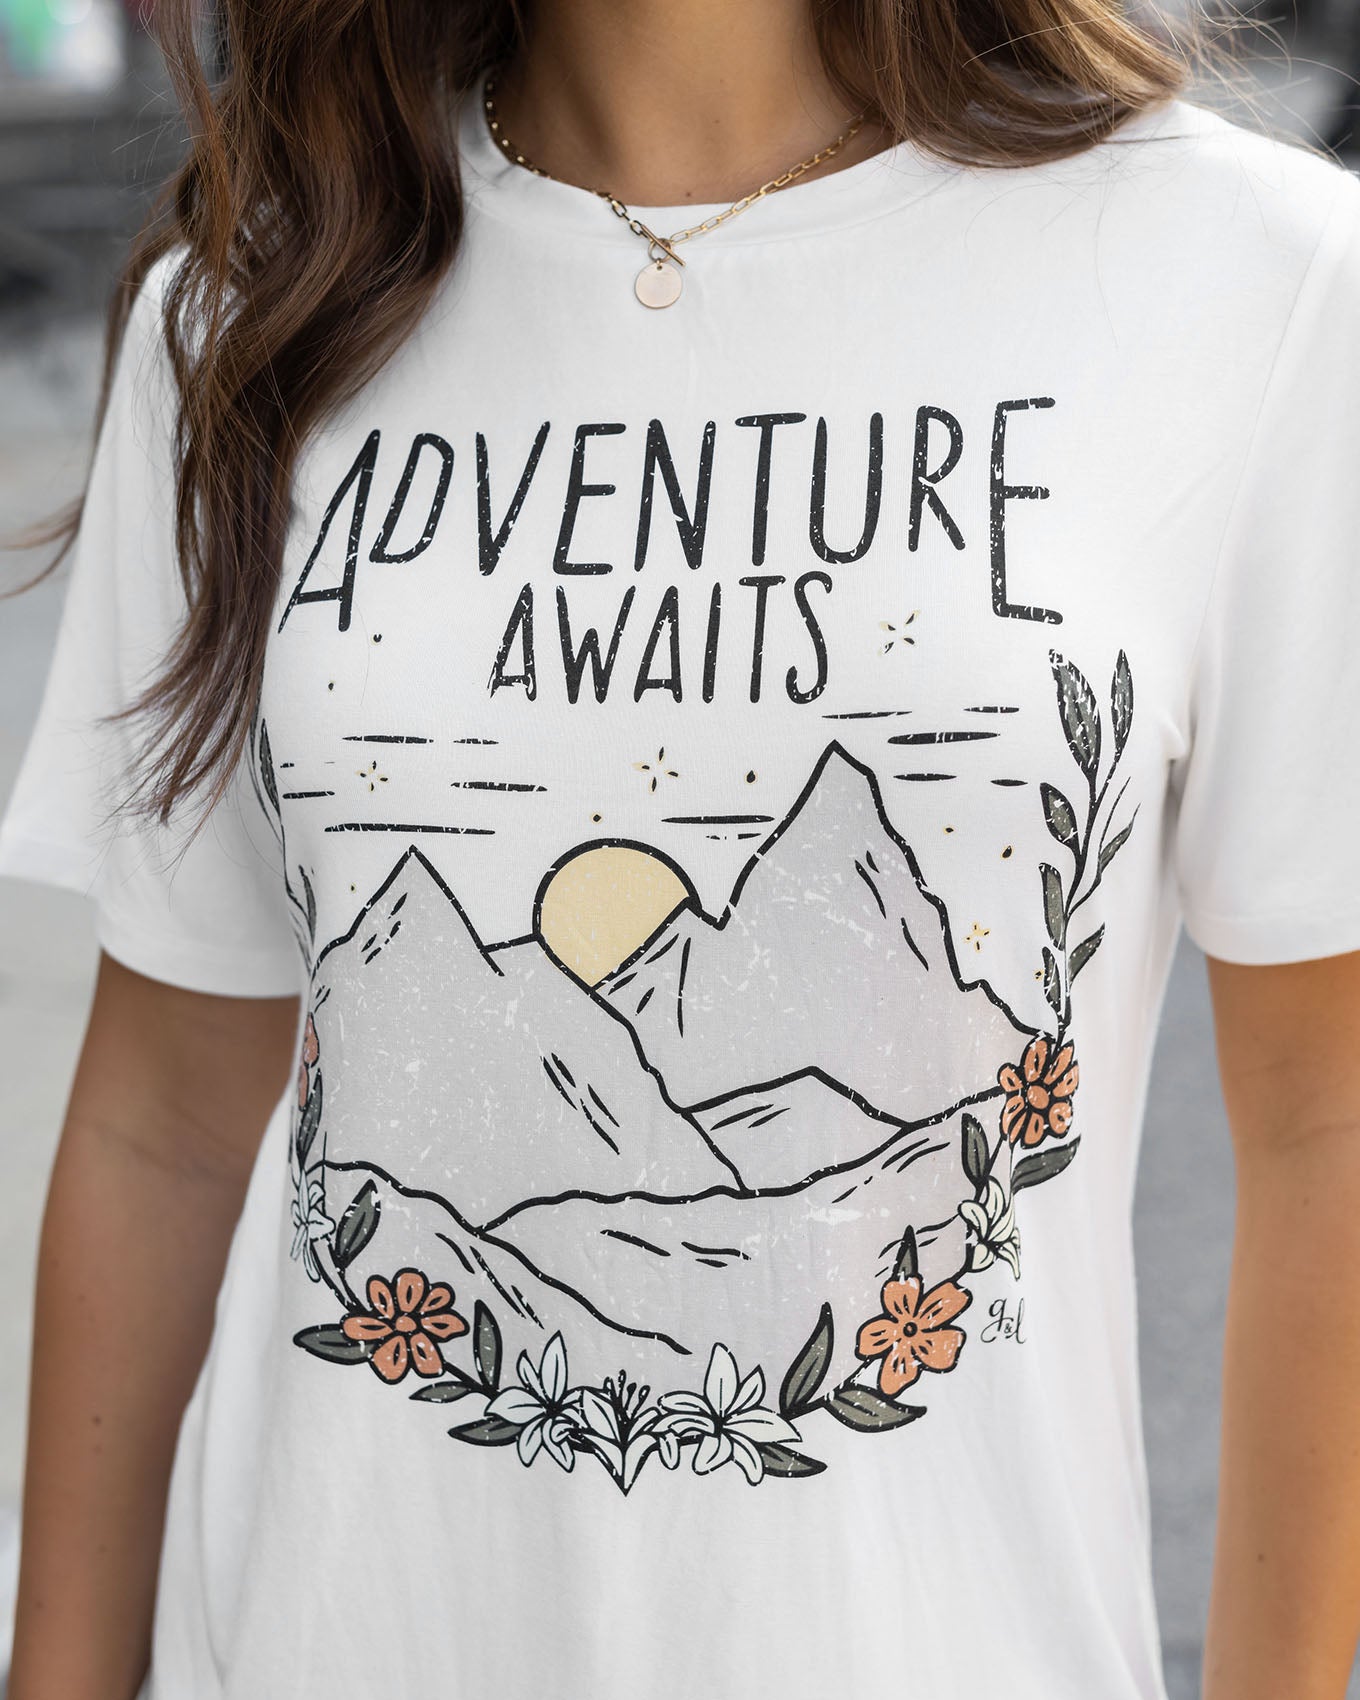 detail view of adventure awaits graphic tee